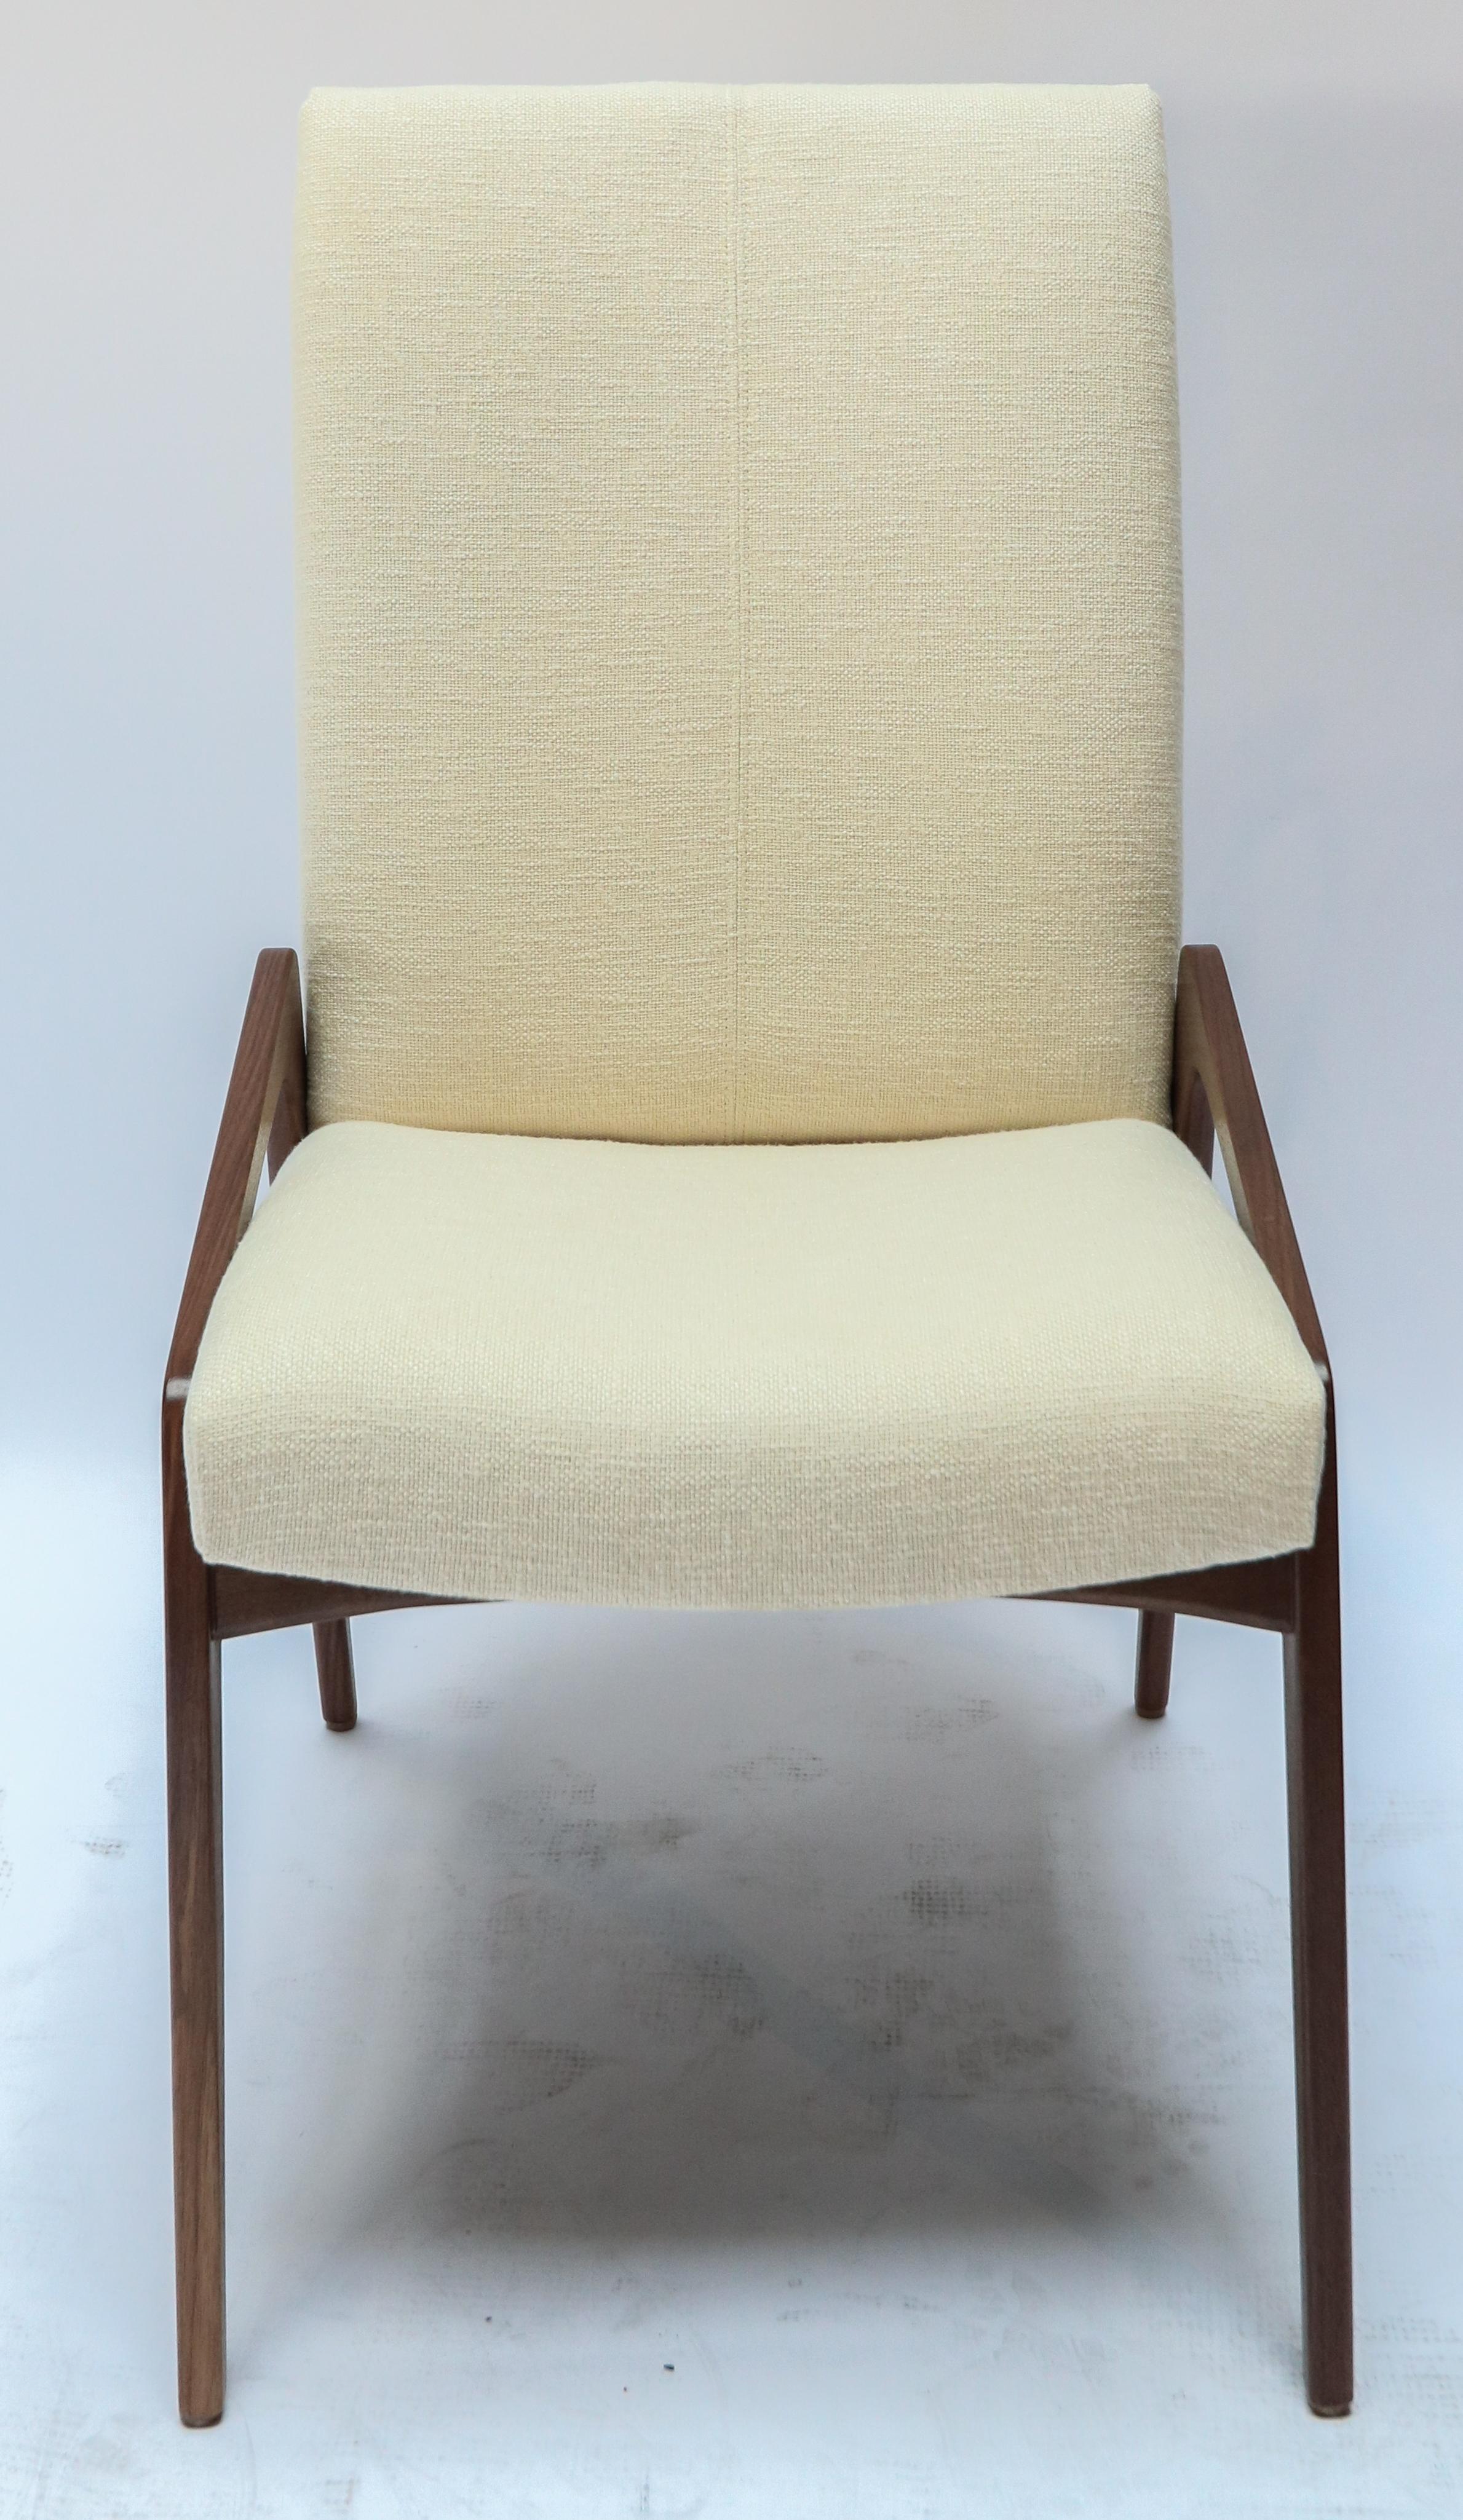 Custom Midcentury Style Walnut Dining Chairs in Ivory Linen by Adesso Imports In New Condition For Sale In Los Angeles, CA